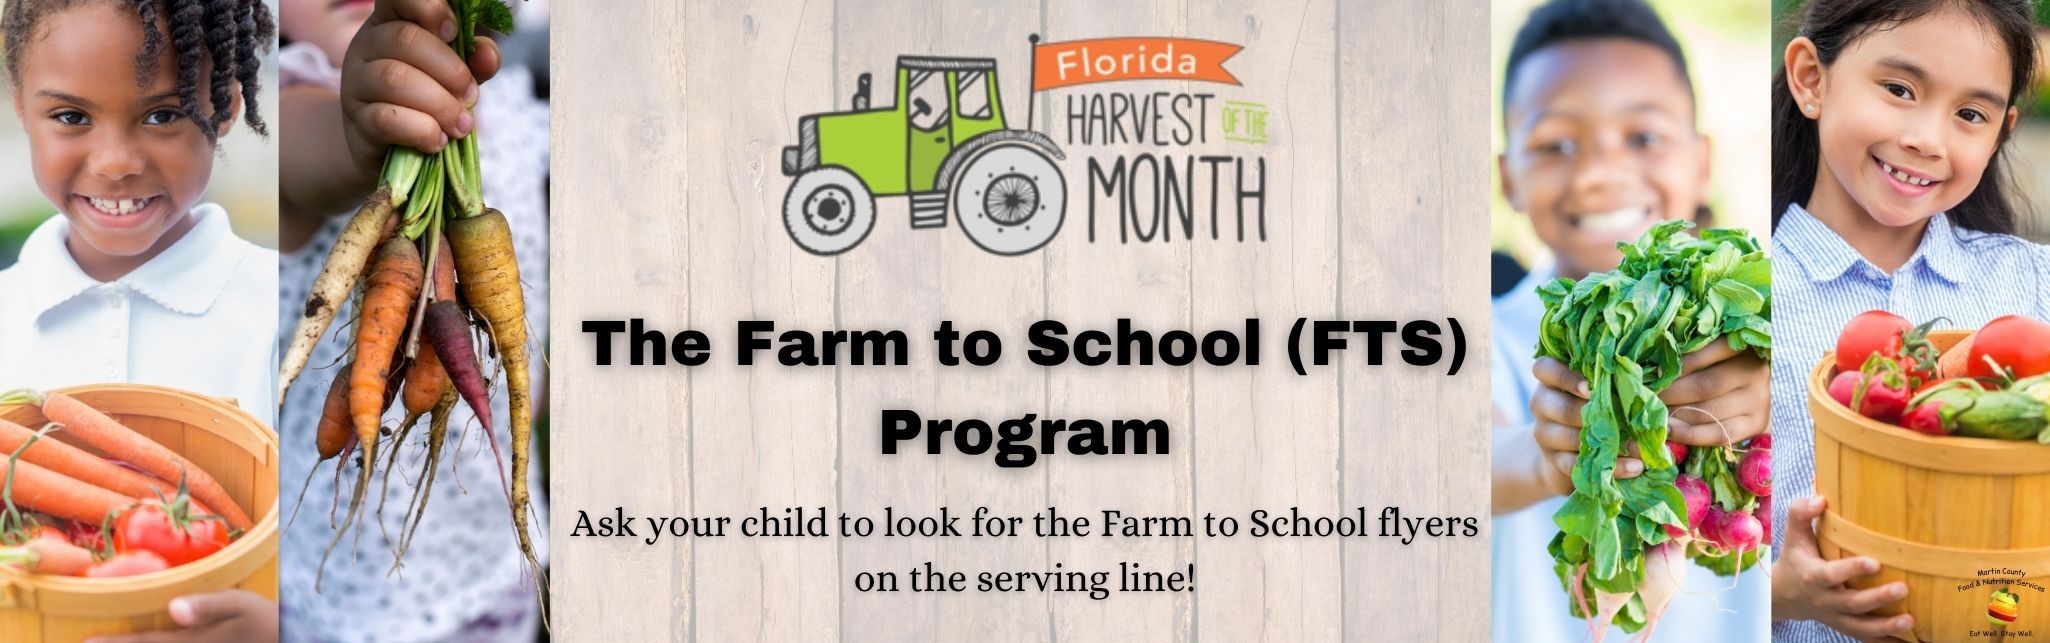 The Farm to School Program. Ask your child to look for the Farm to School flyers on the serving line!